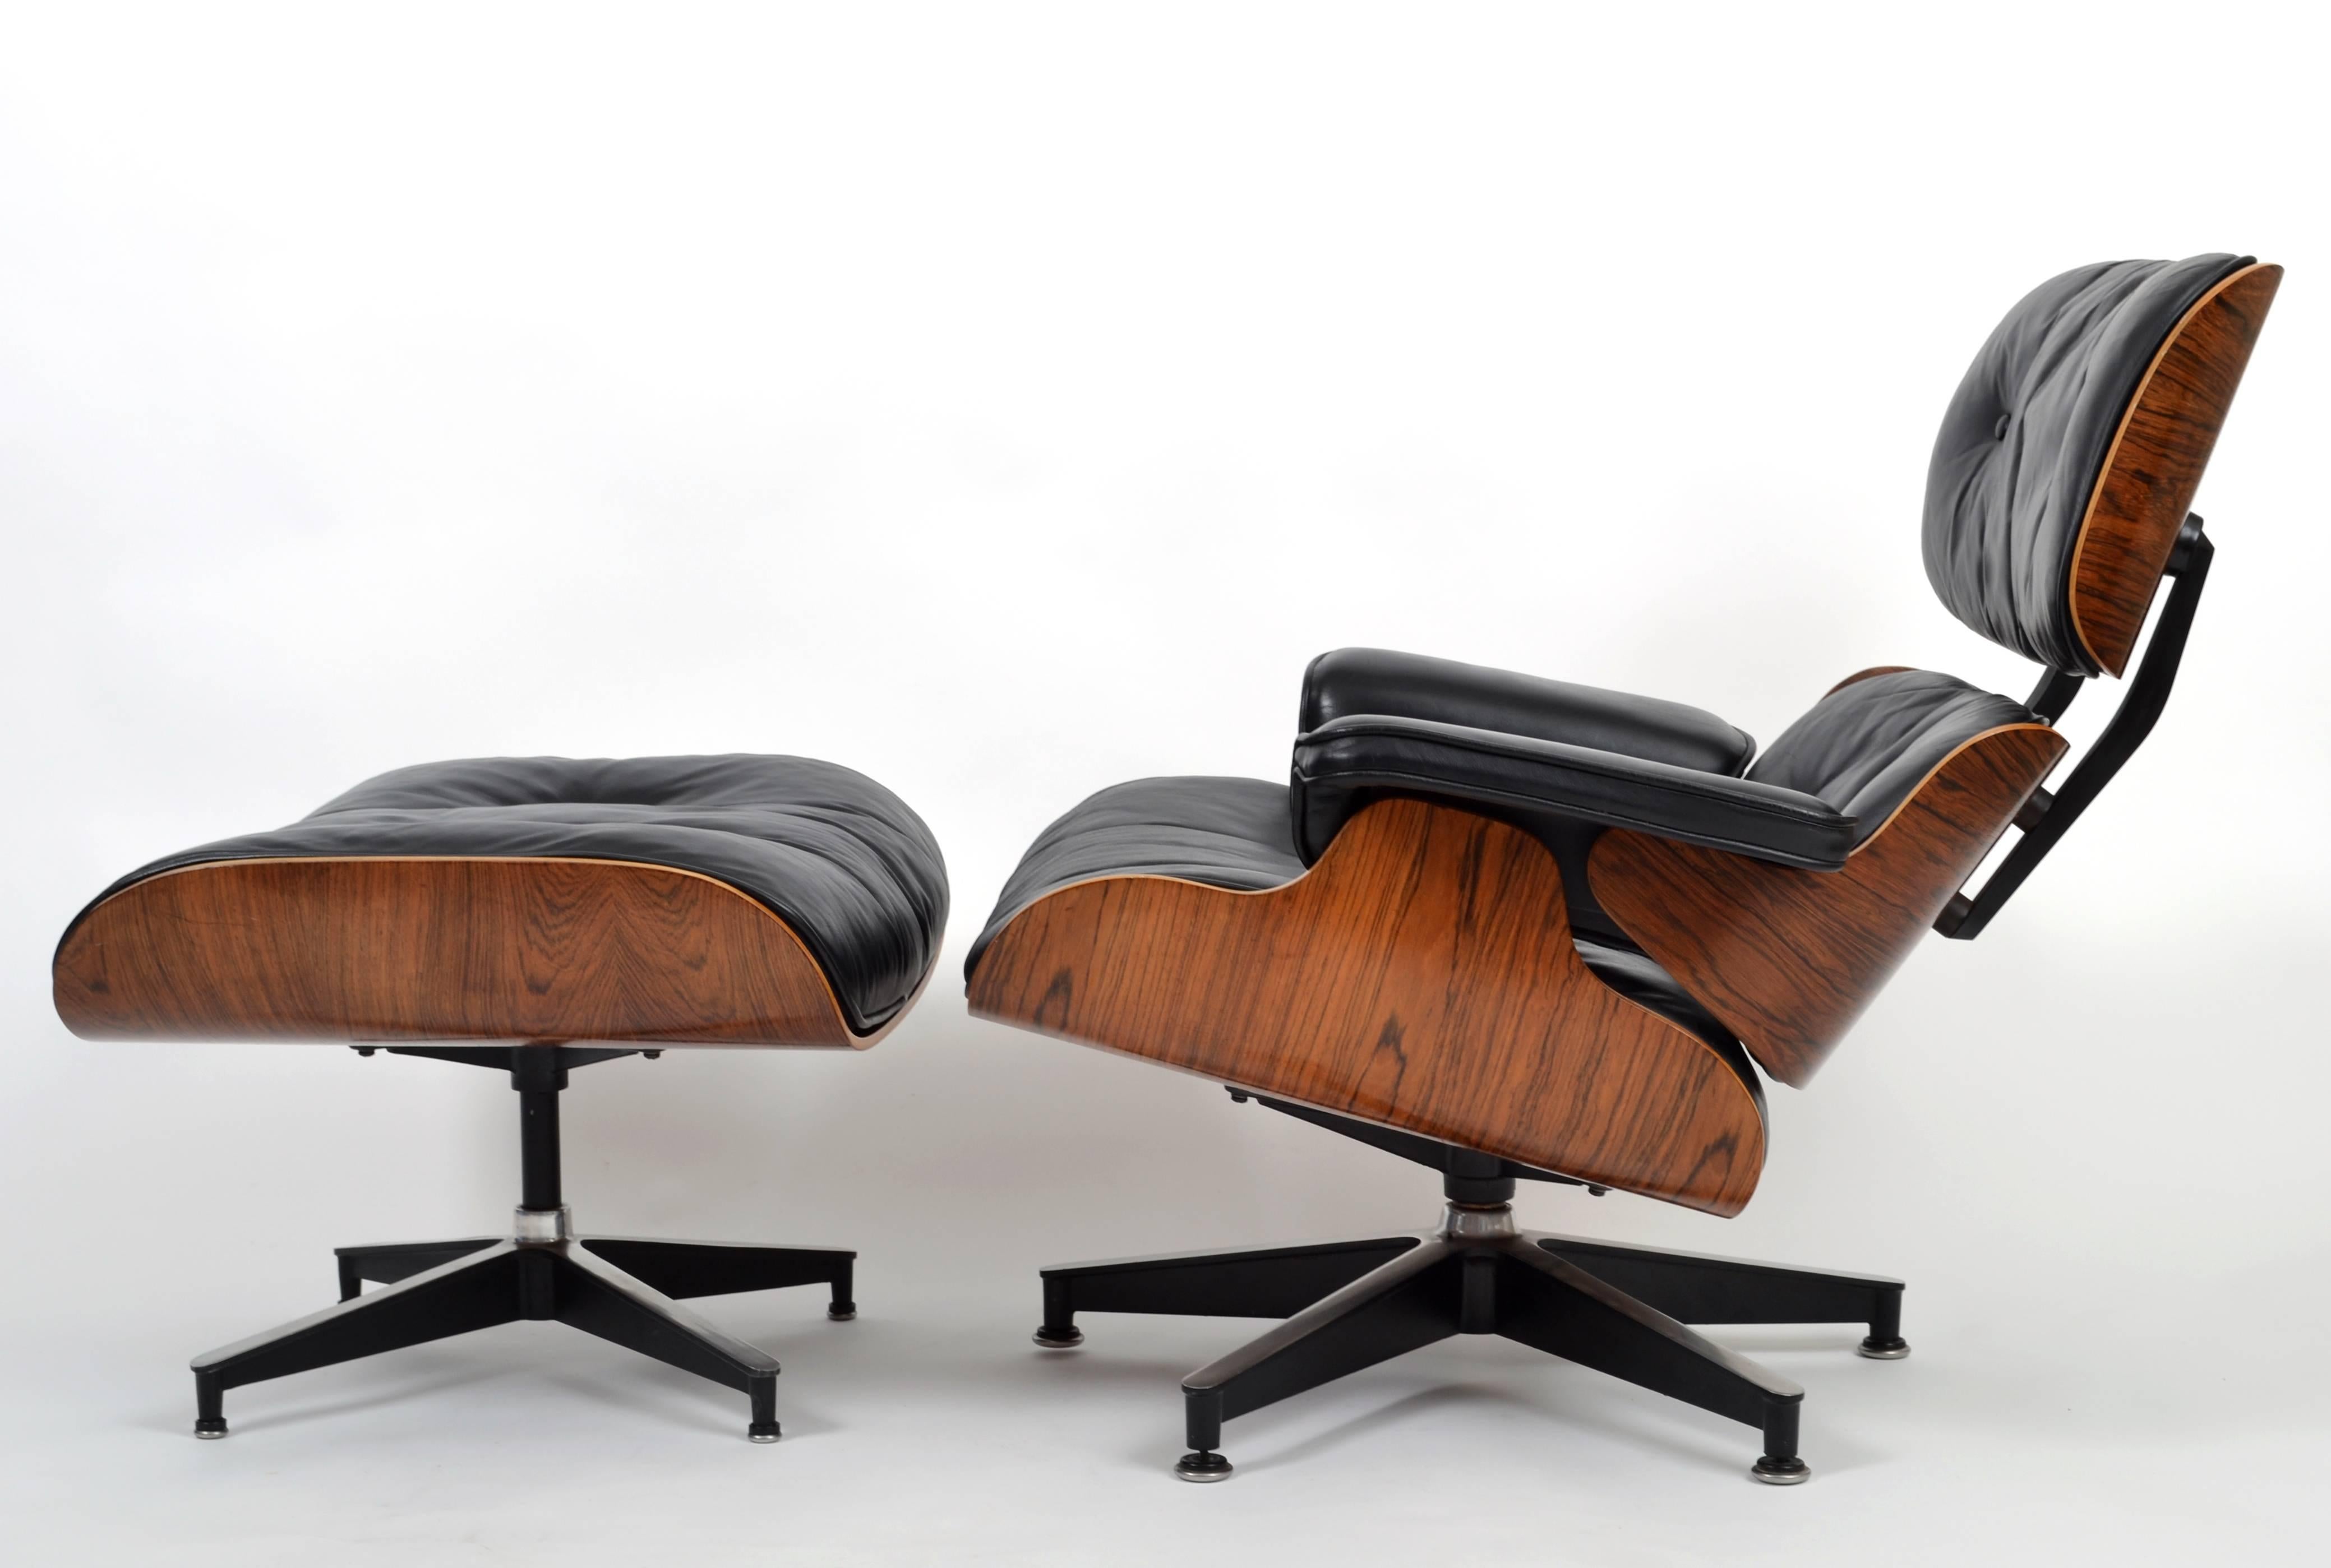 An incredible, all original 1960s Herman Miller, Eames 670 and 671 with beautiful wood grain and leather condition. This chair is in remarkable condition for its age. This lounge is one of a pair acquired at the same time (reference number for the